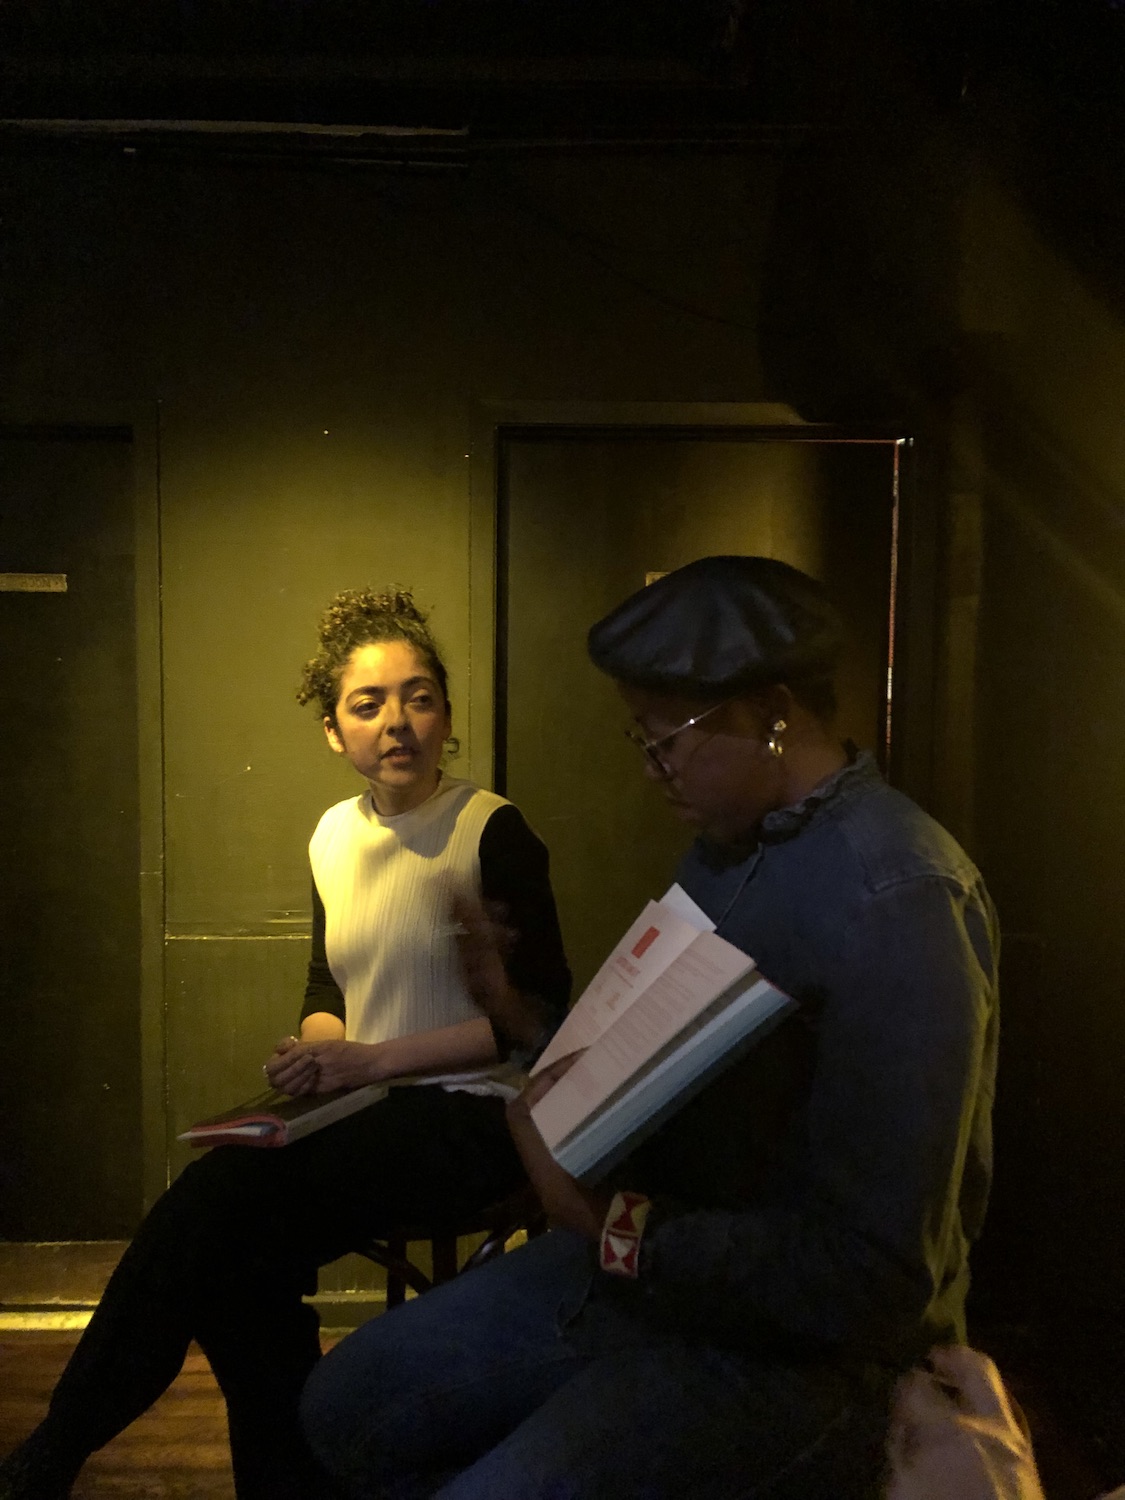 Two figures, the nearer video is holding up a book and wears a black cap, a dark denim shirt and glassees. The father person has a white shirt with black sleeves on and dark pants.